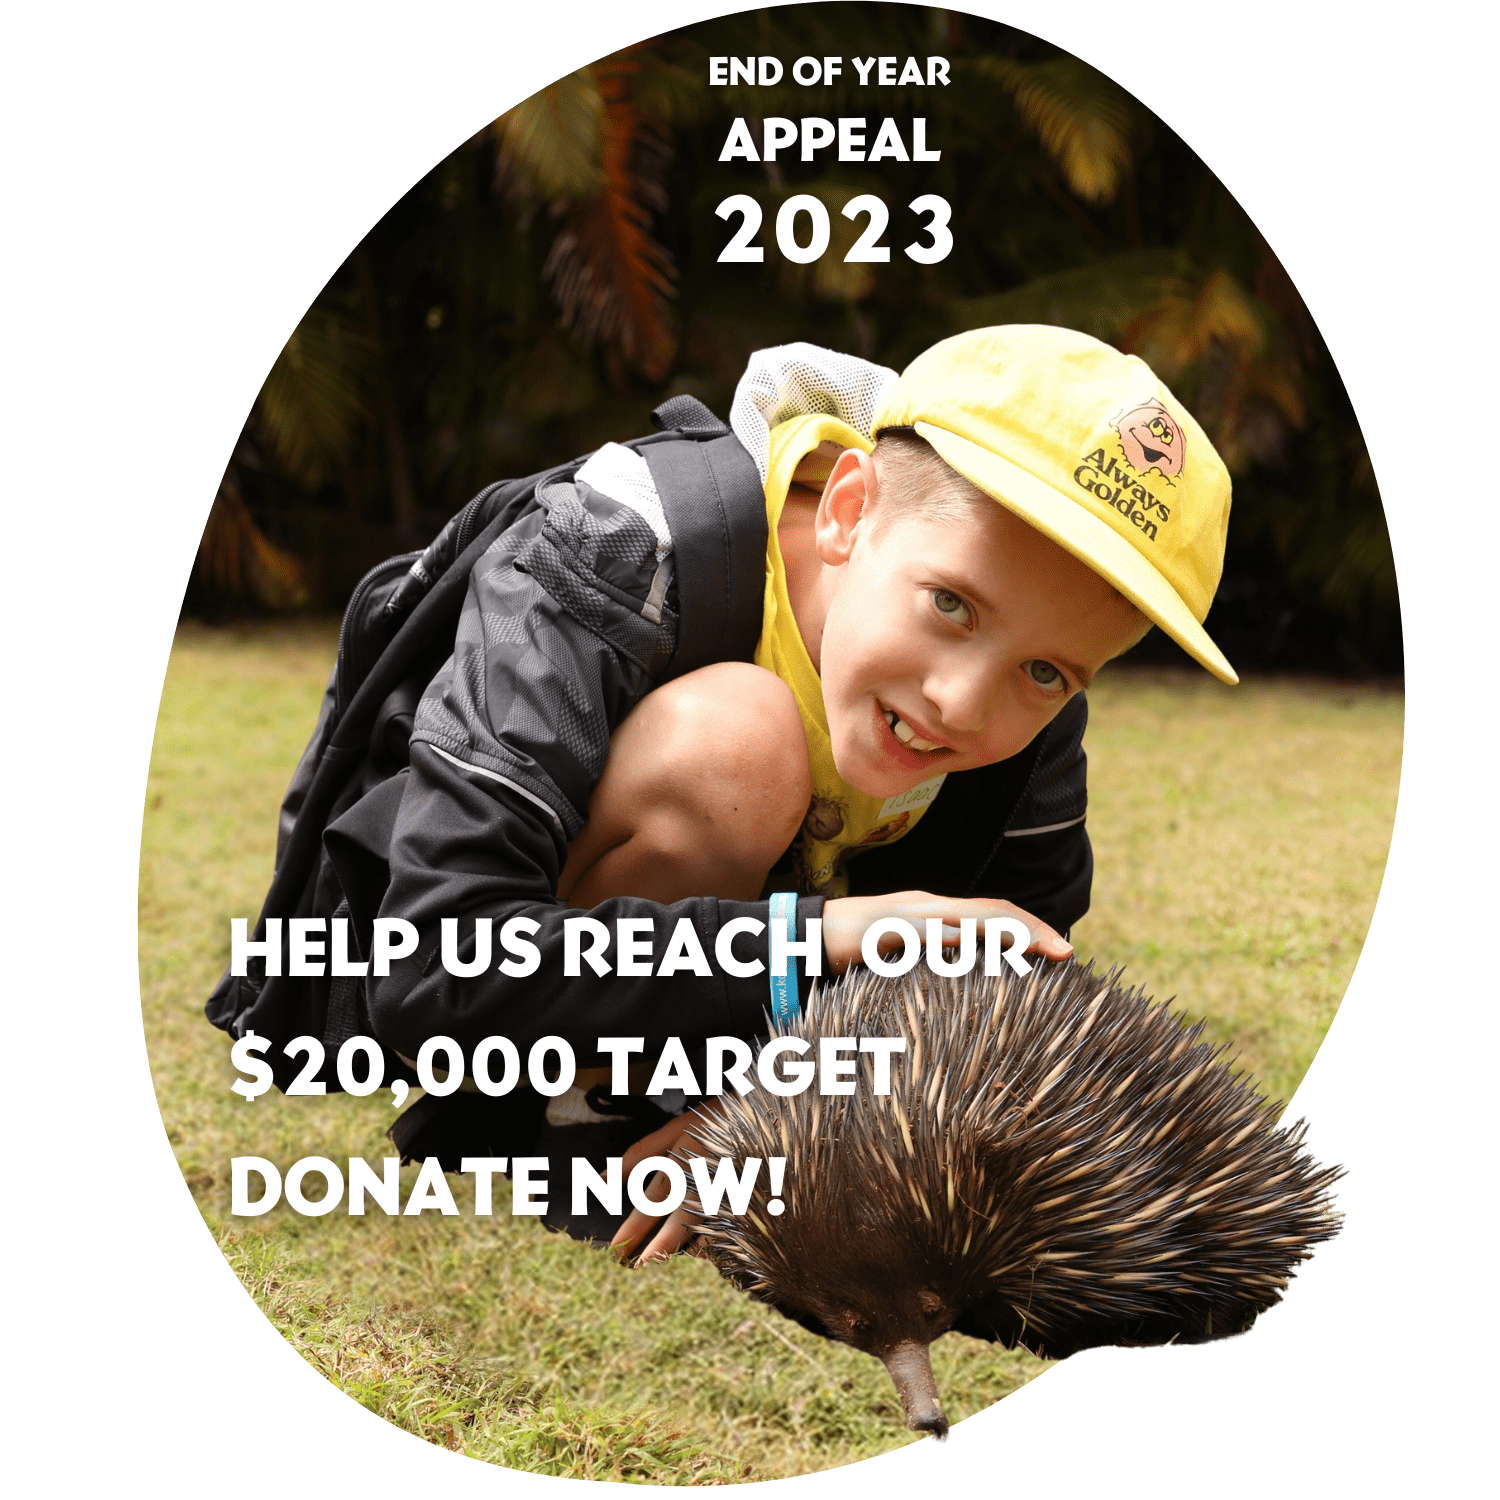 Can you help us? Please Donate to Sunset's End of Year Campaign